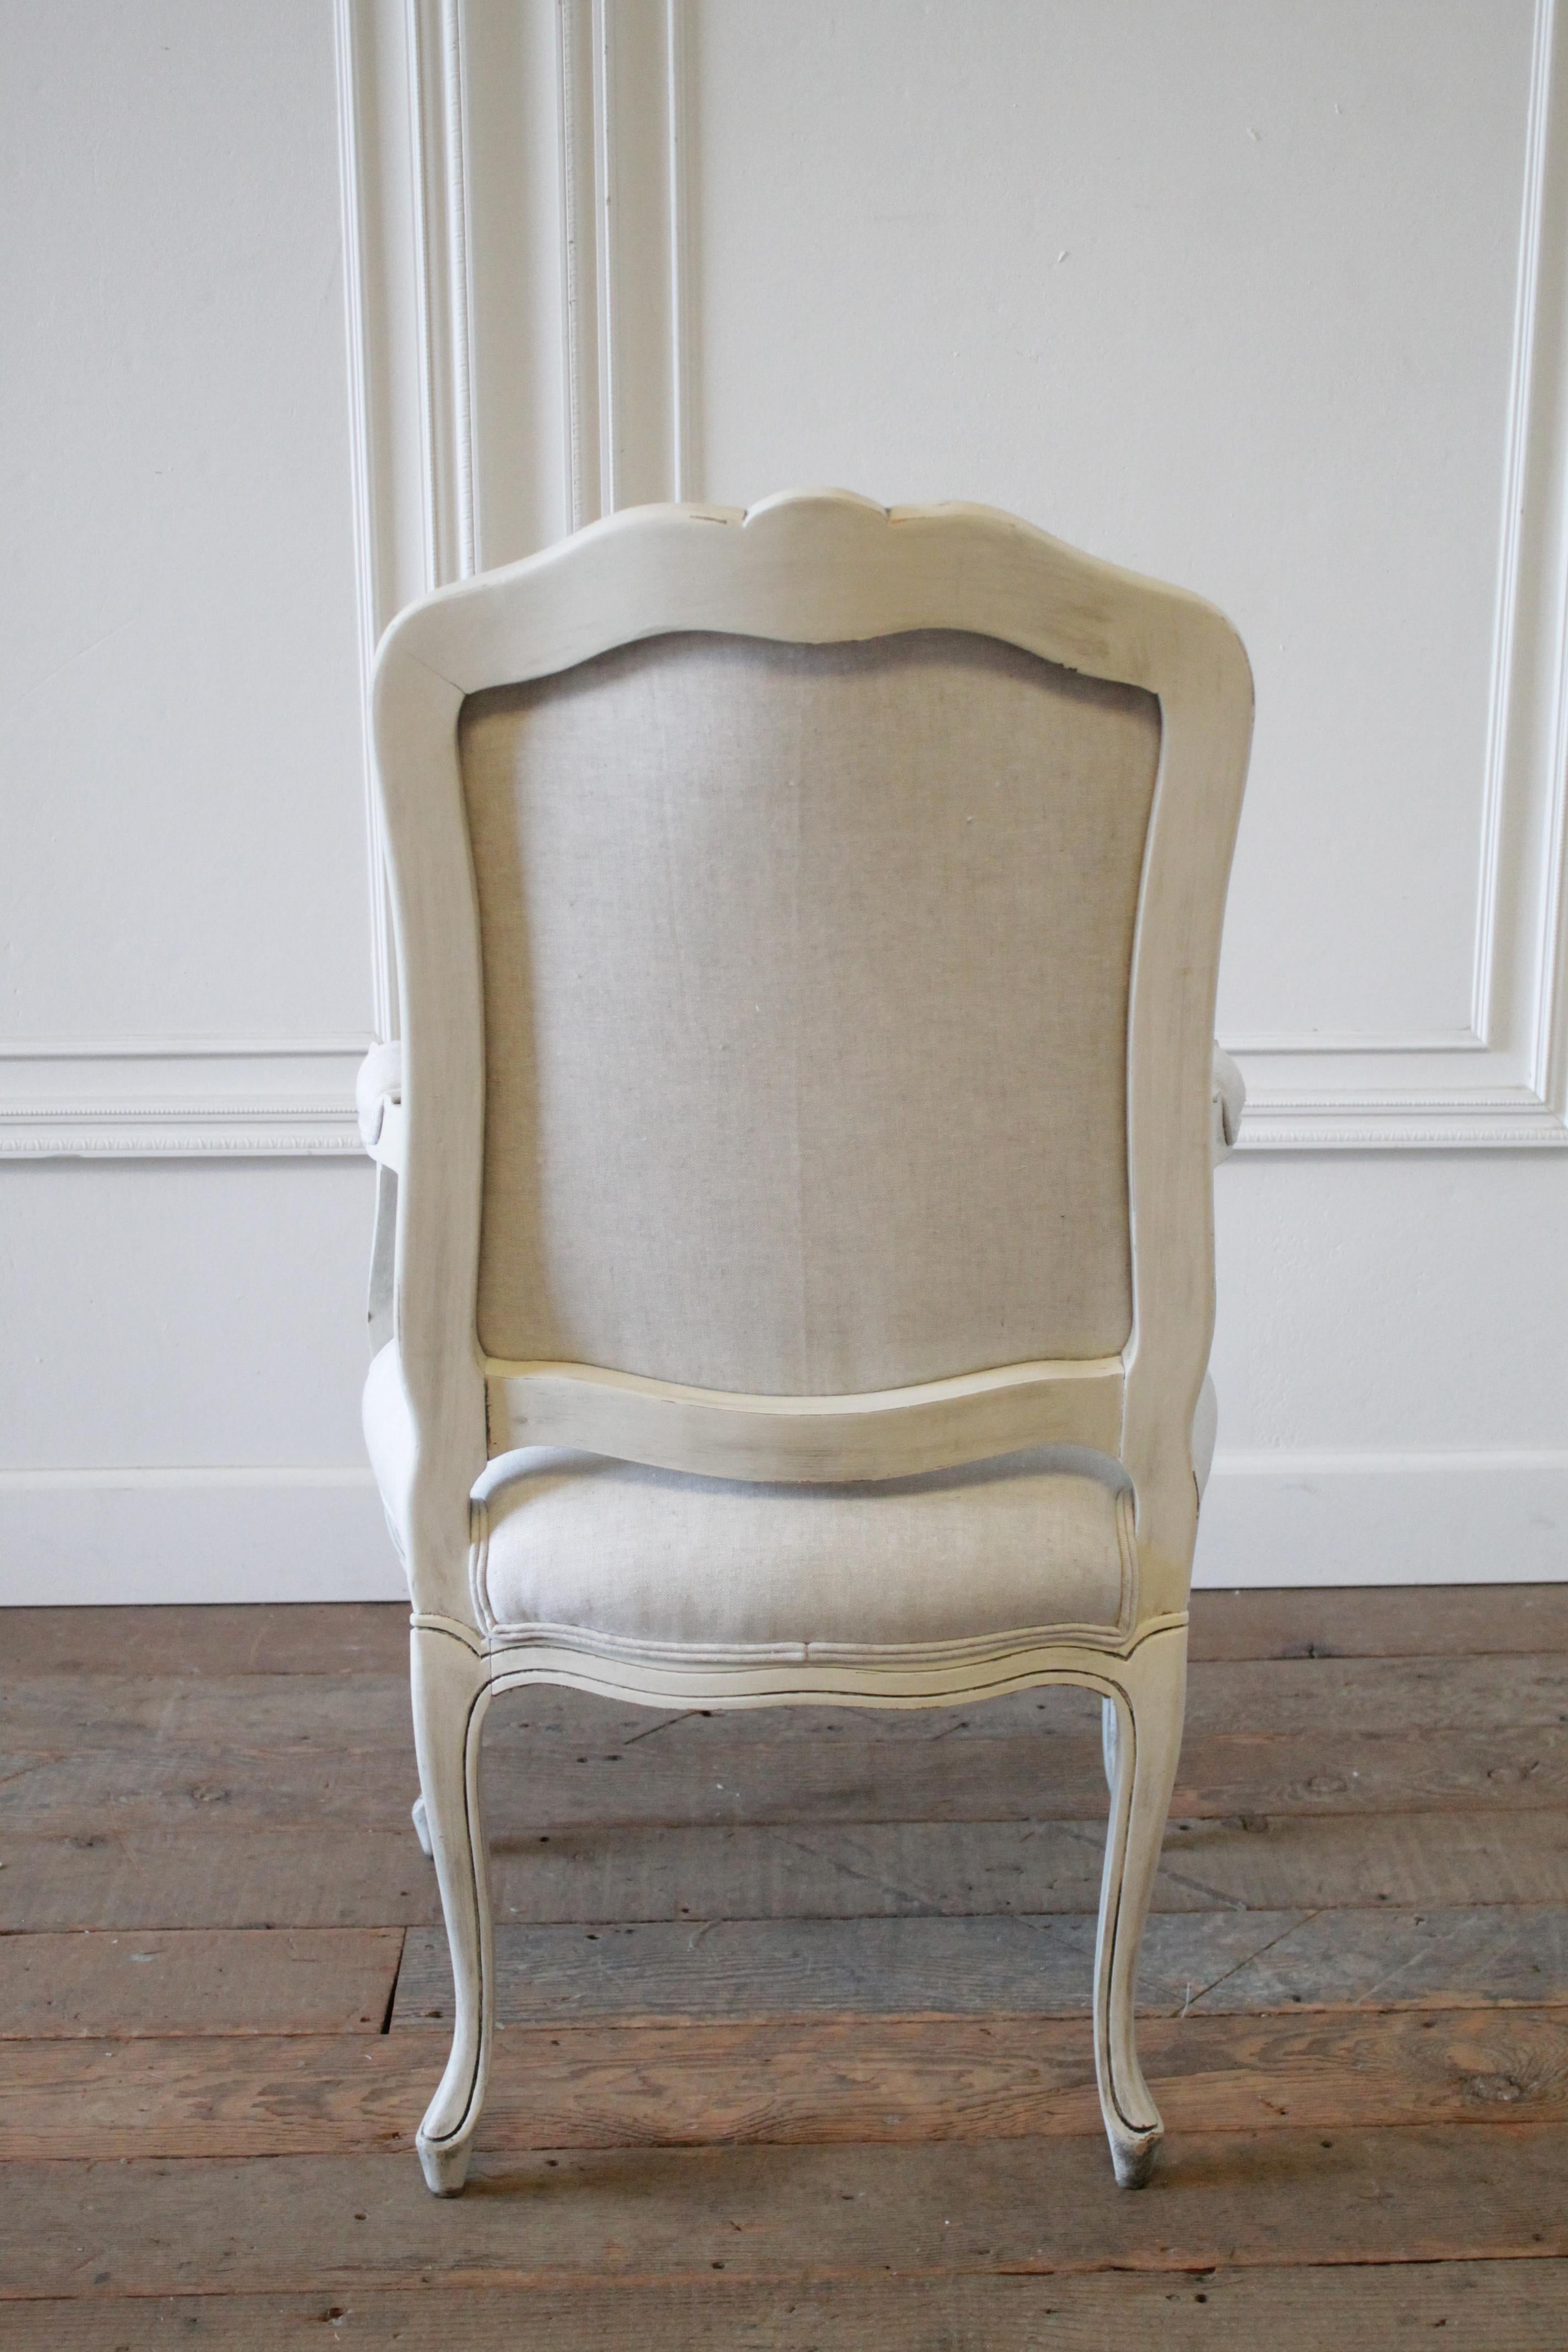 Painted French Provincial Style Chair and Ottoman Upholstered in Belgian Linen 1